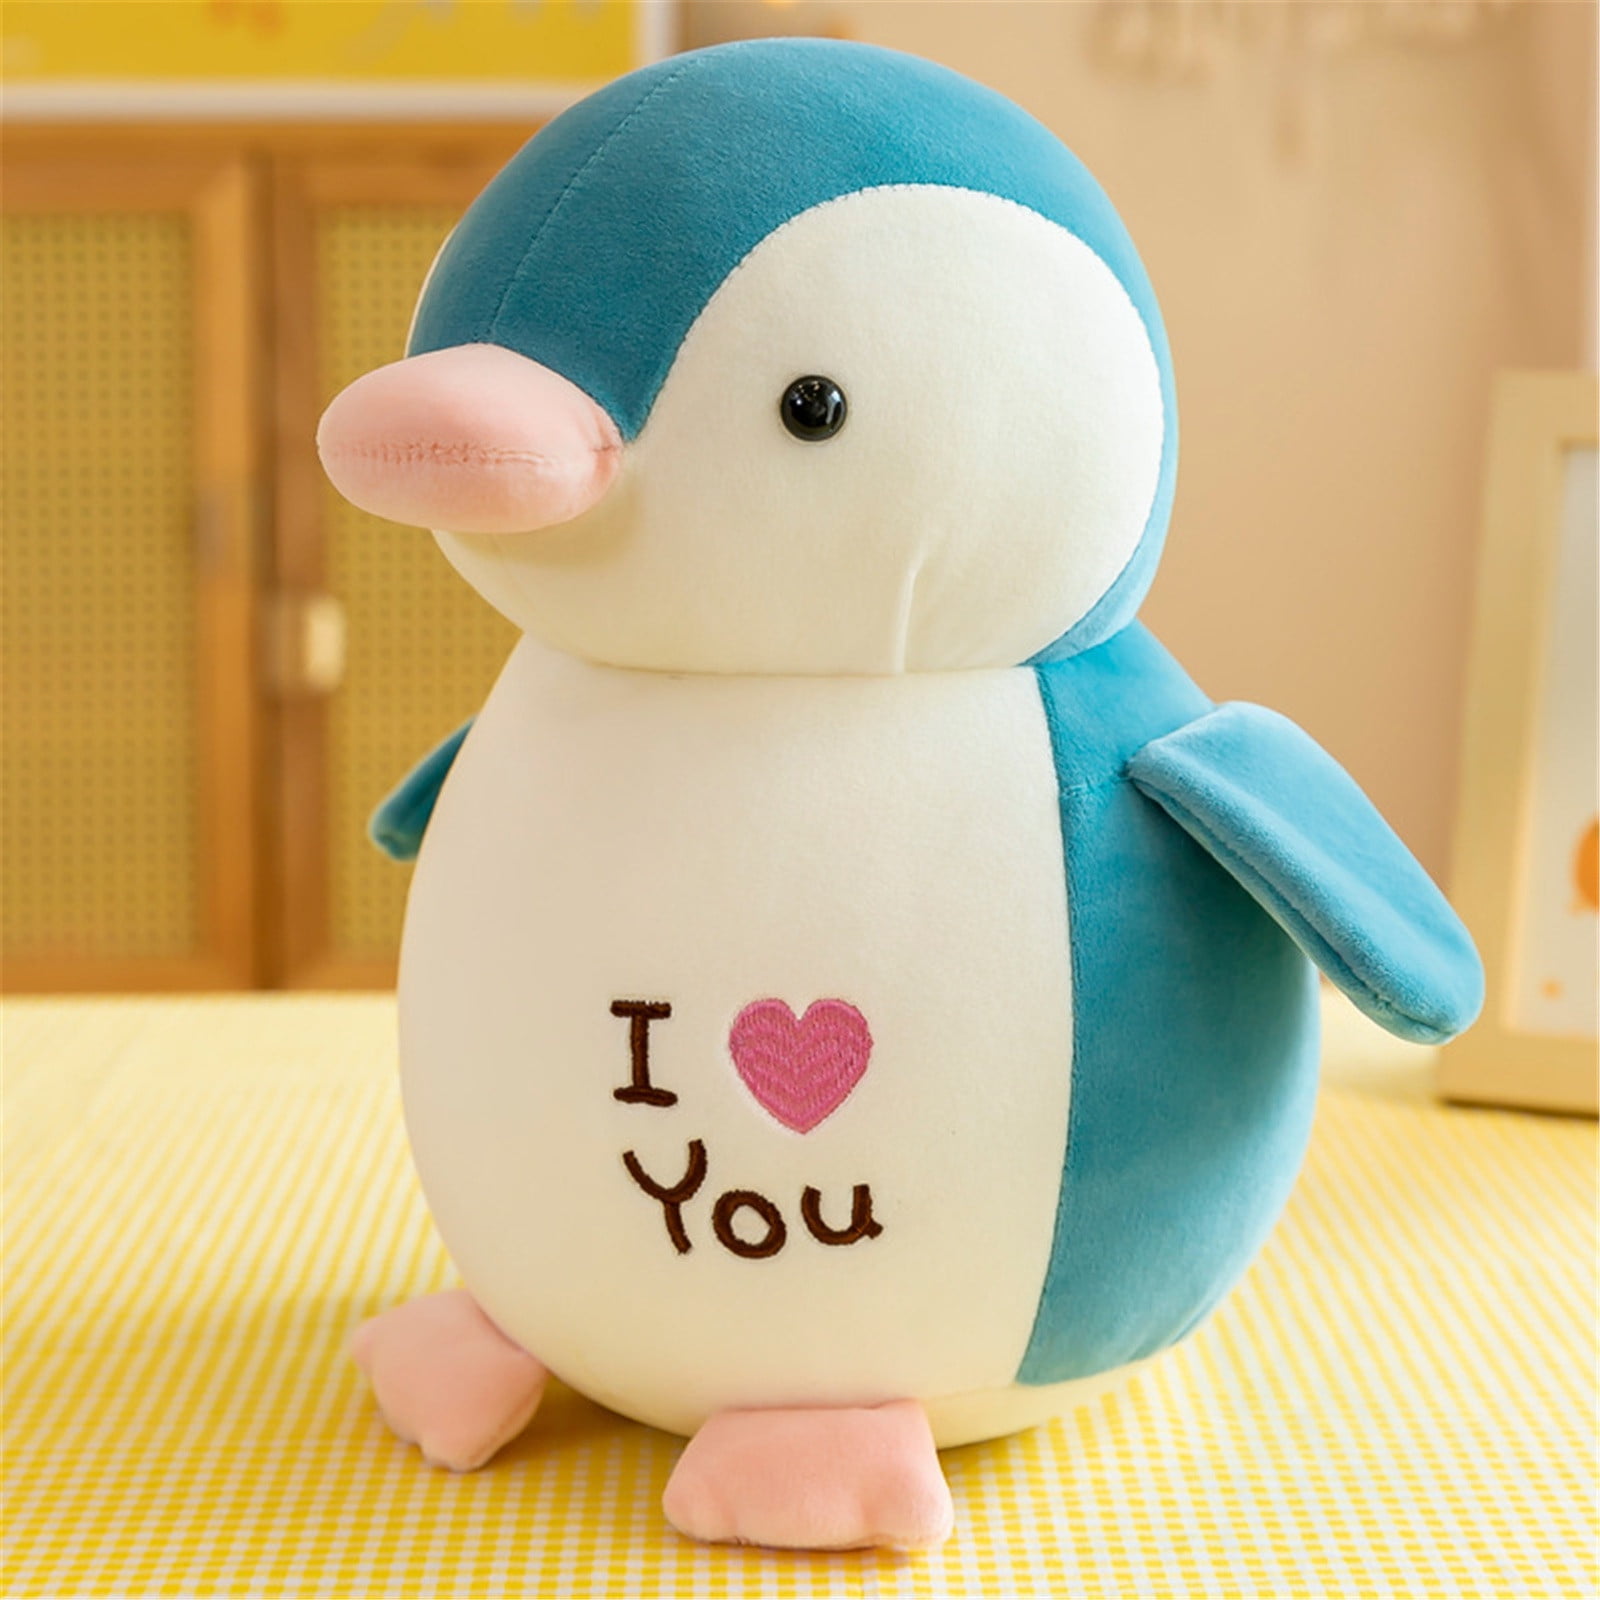 Plush Penguin, Animal Plush Toy, Kawaii Stuffed Animal, Cute Plush Pillow,  Cute Cushion, Great for Autism, Concentration, Stress Relief, Gift for